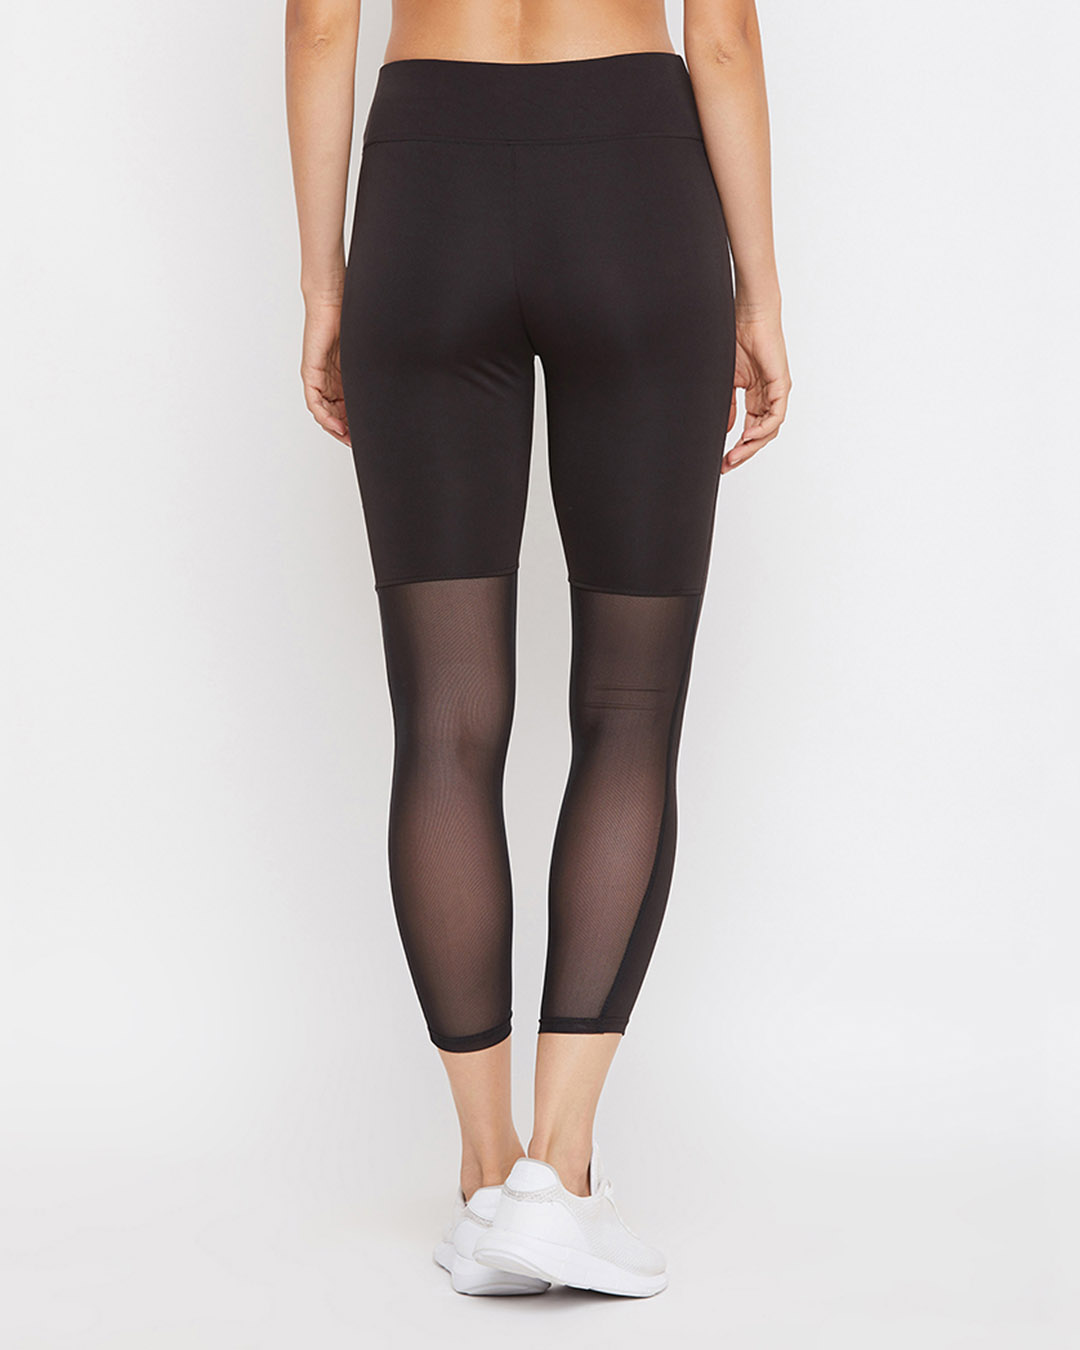 Zyia Active New Release Wednesday - New Primo Mesh Leggings and Bra | Teach  Learn Style